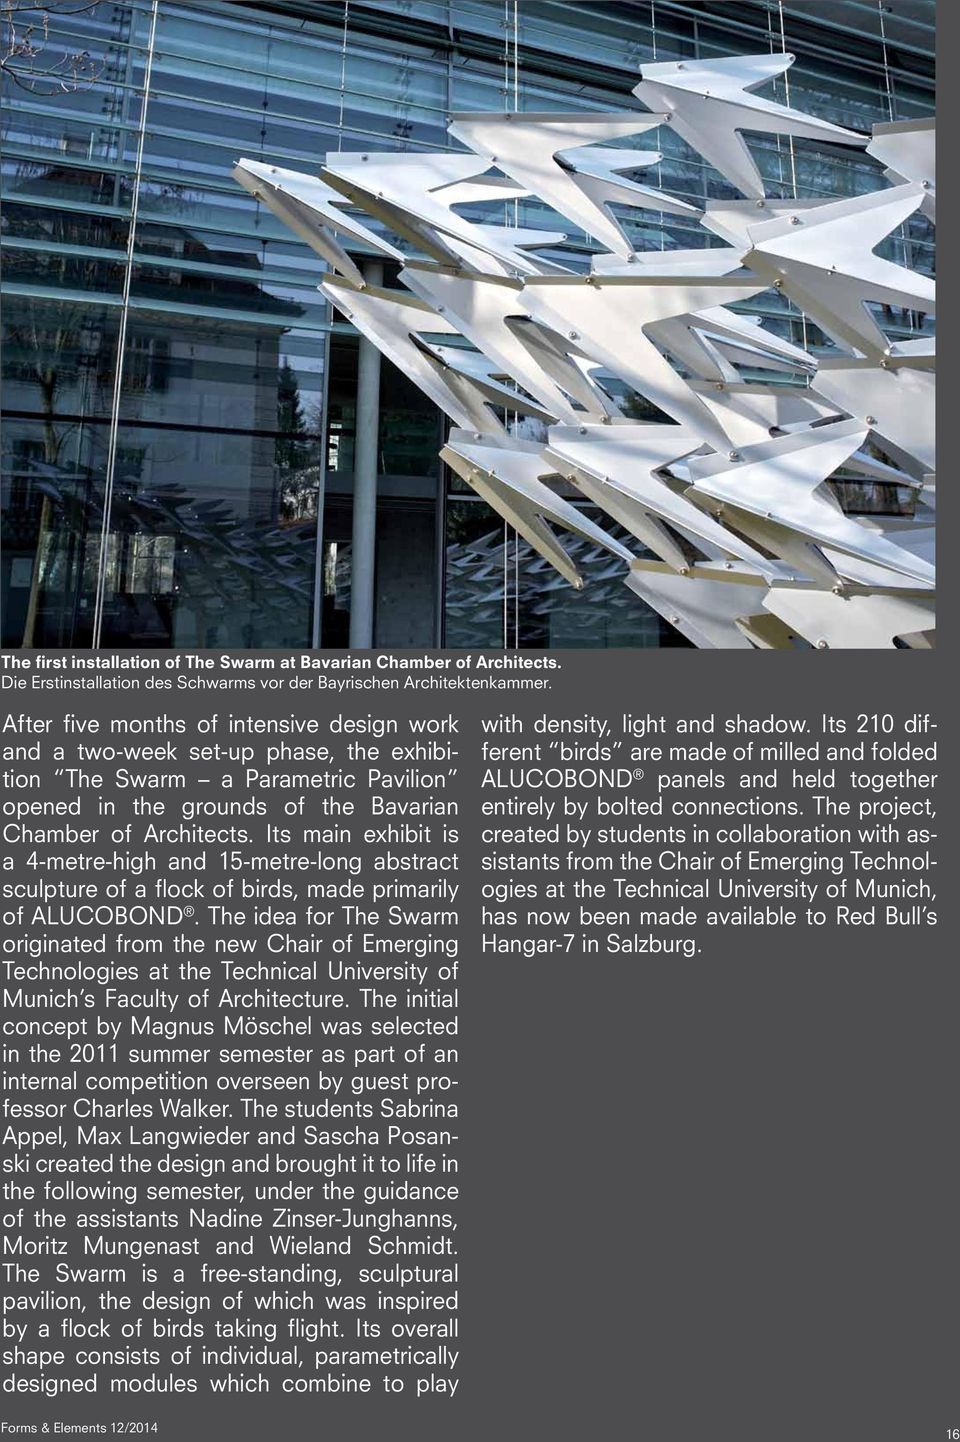 Its main exhibit is a 4-metre-high and 15-metre-long abstract sculpture of a flock of birds, made primarily of ALUCOBOND.